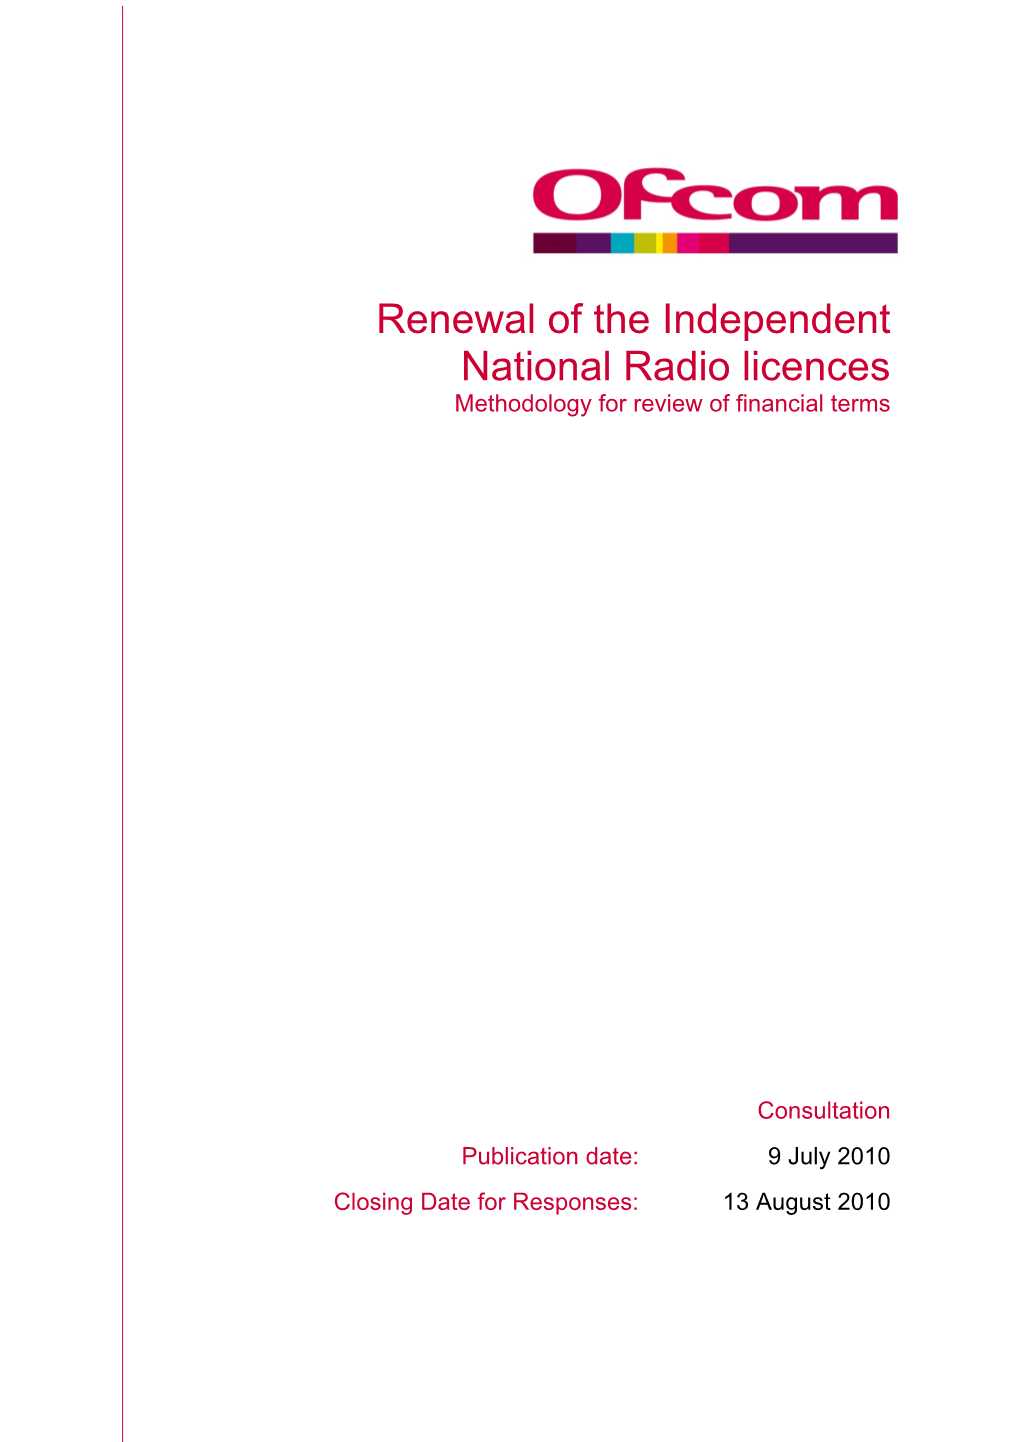 Renewal of the Independent National Radio Licences Methodology for Review of Financial Terms